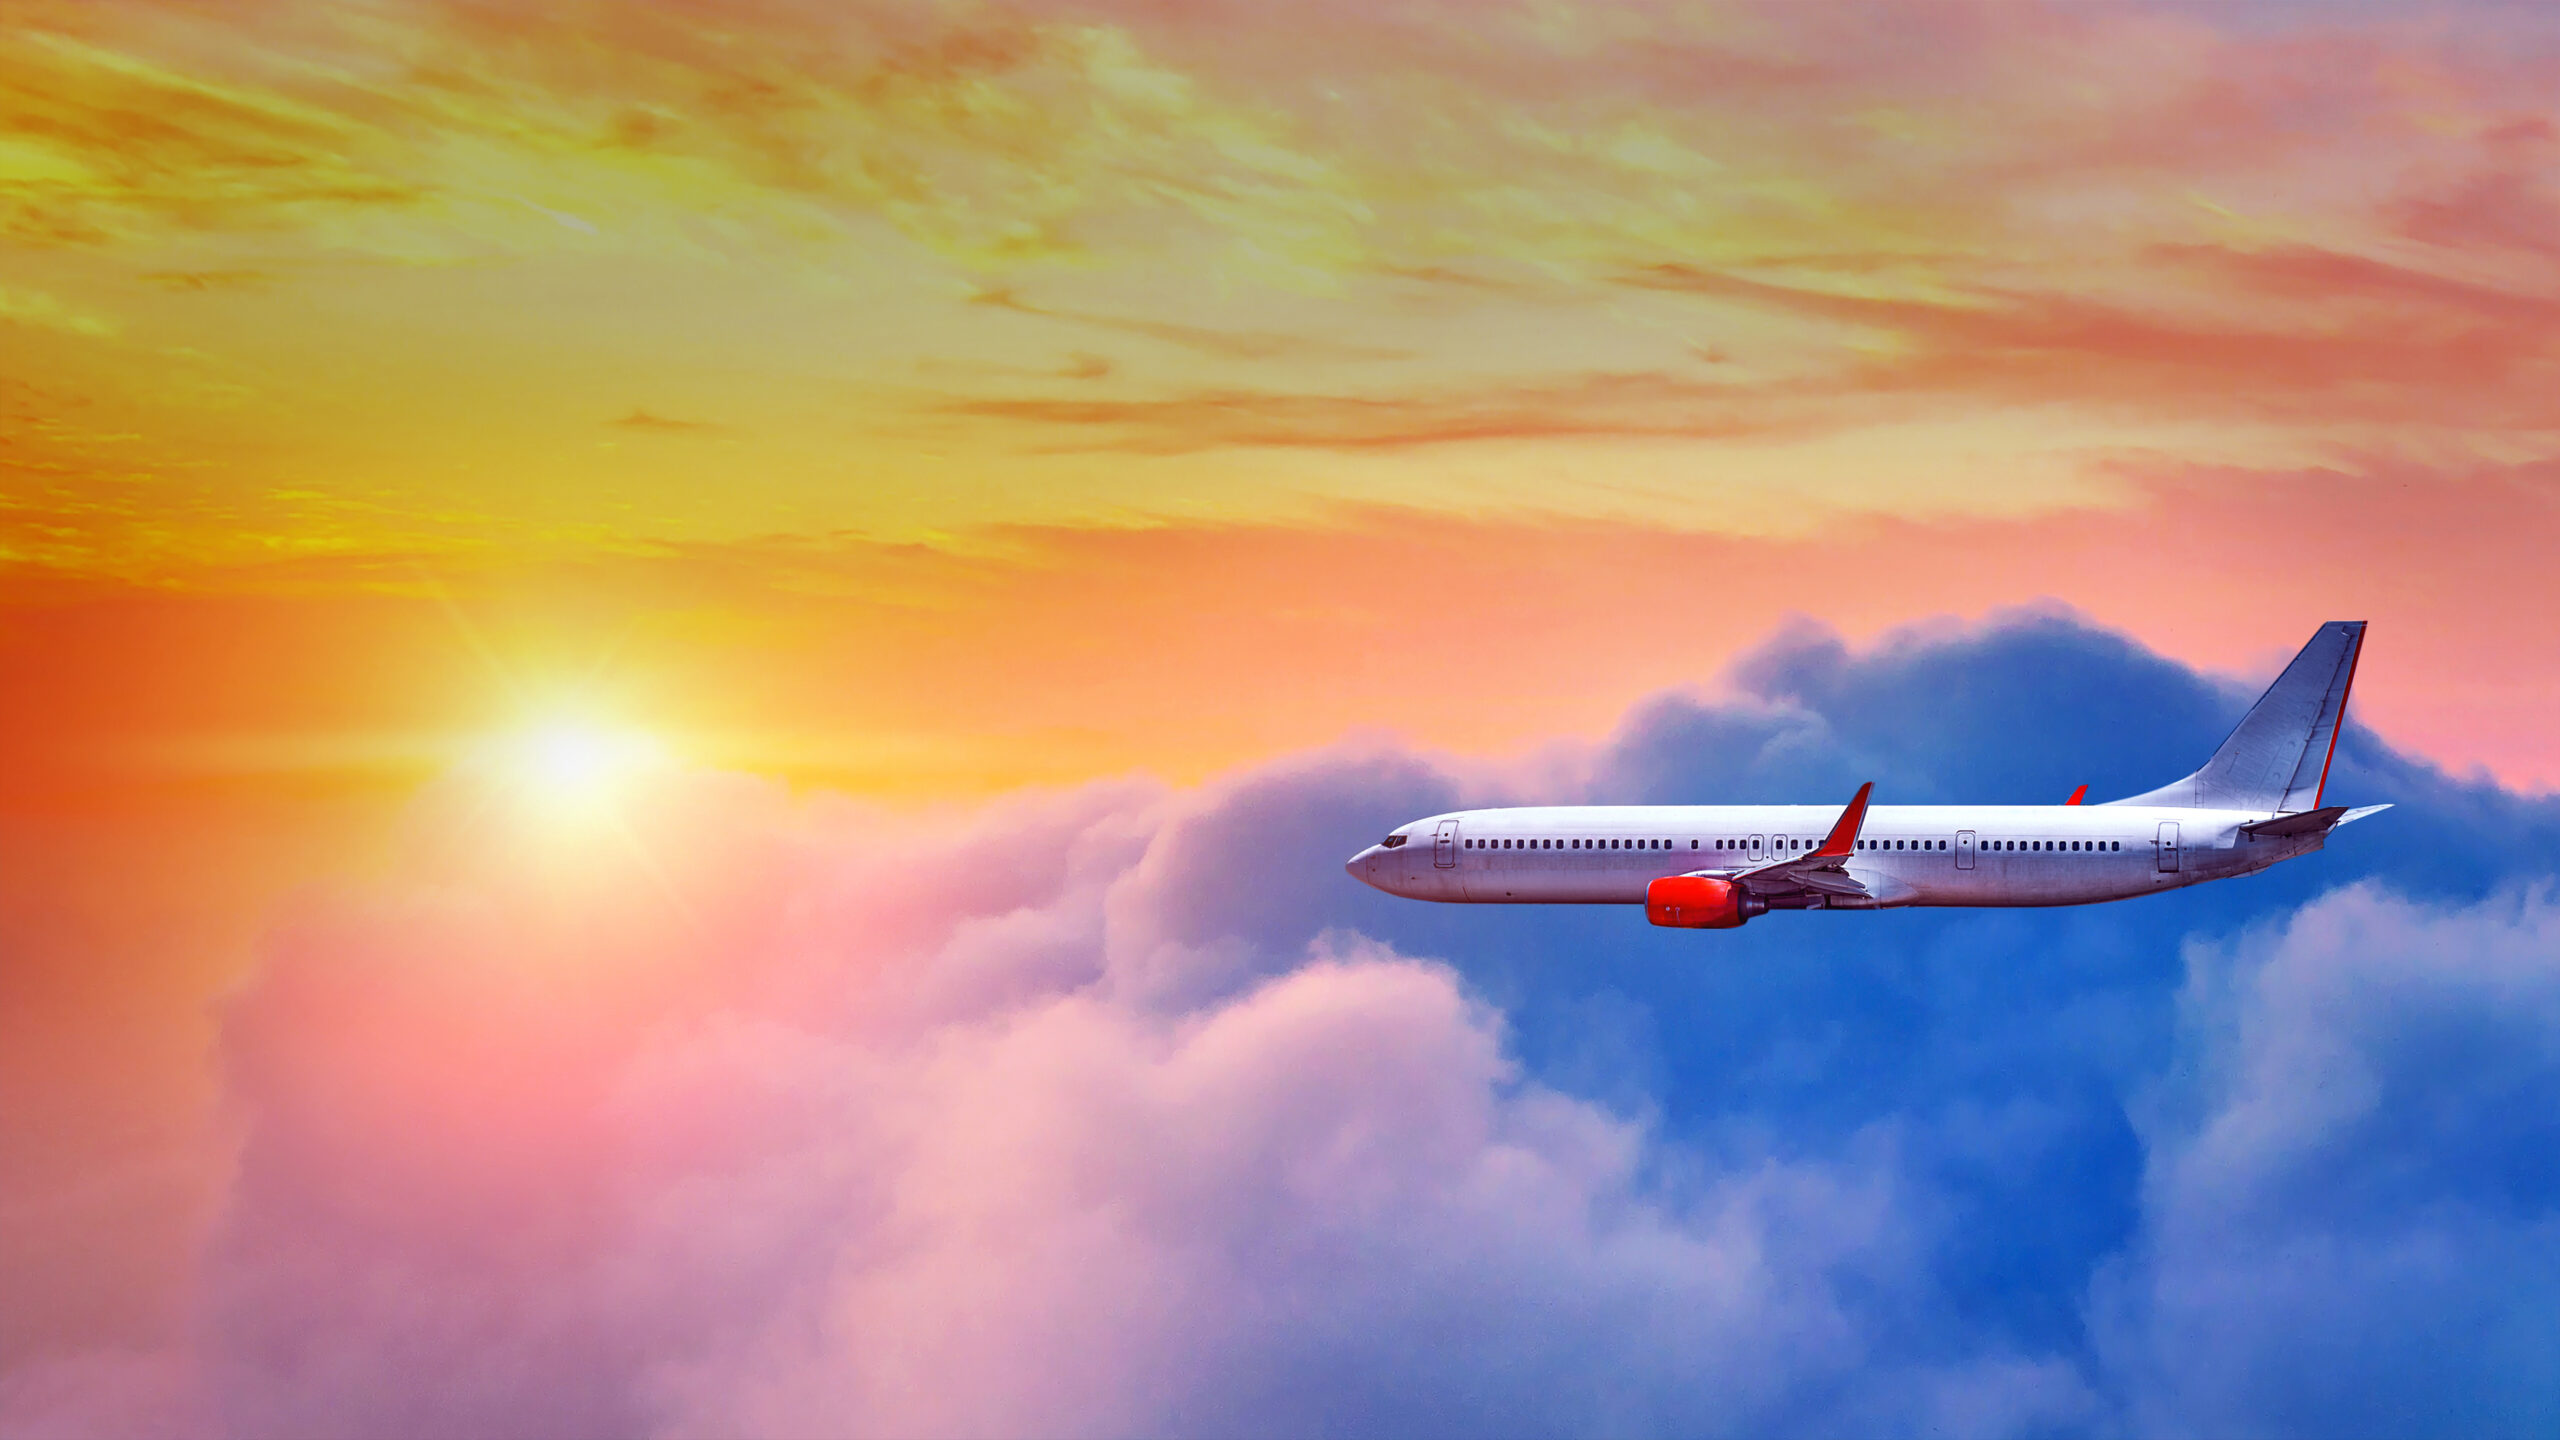 Airplane flying above clouds in sunset light.